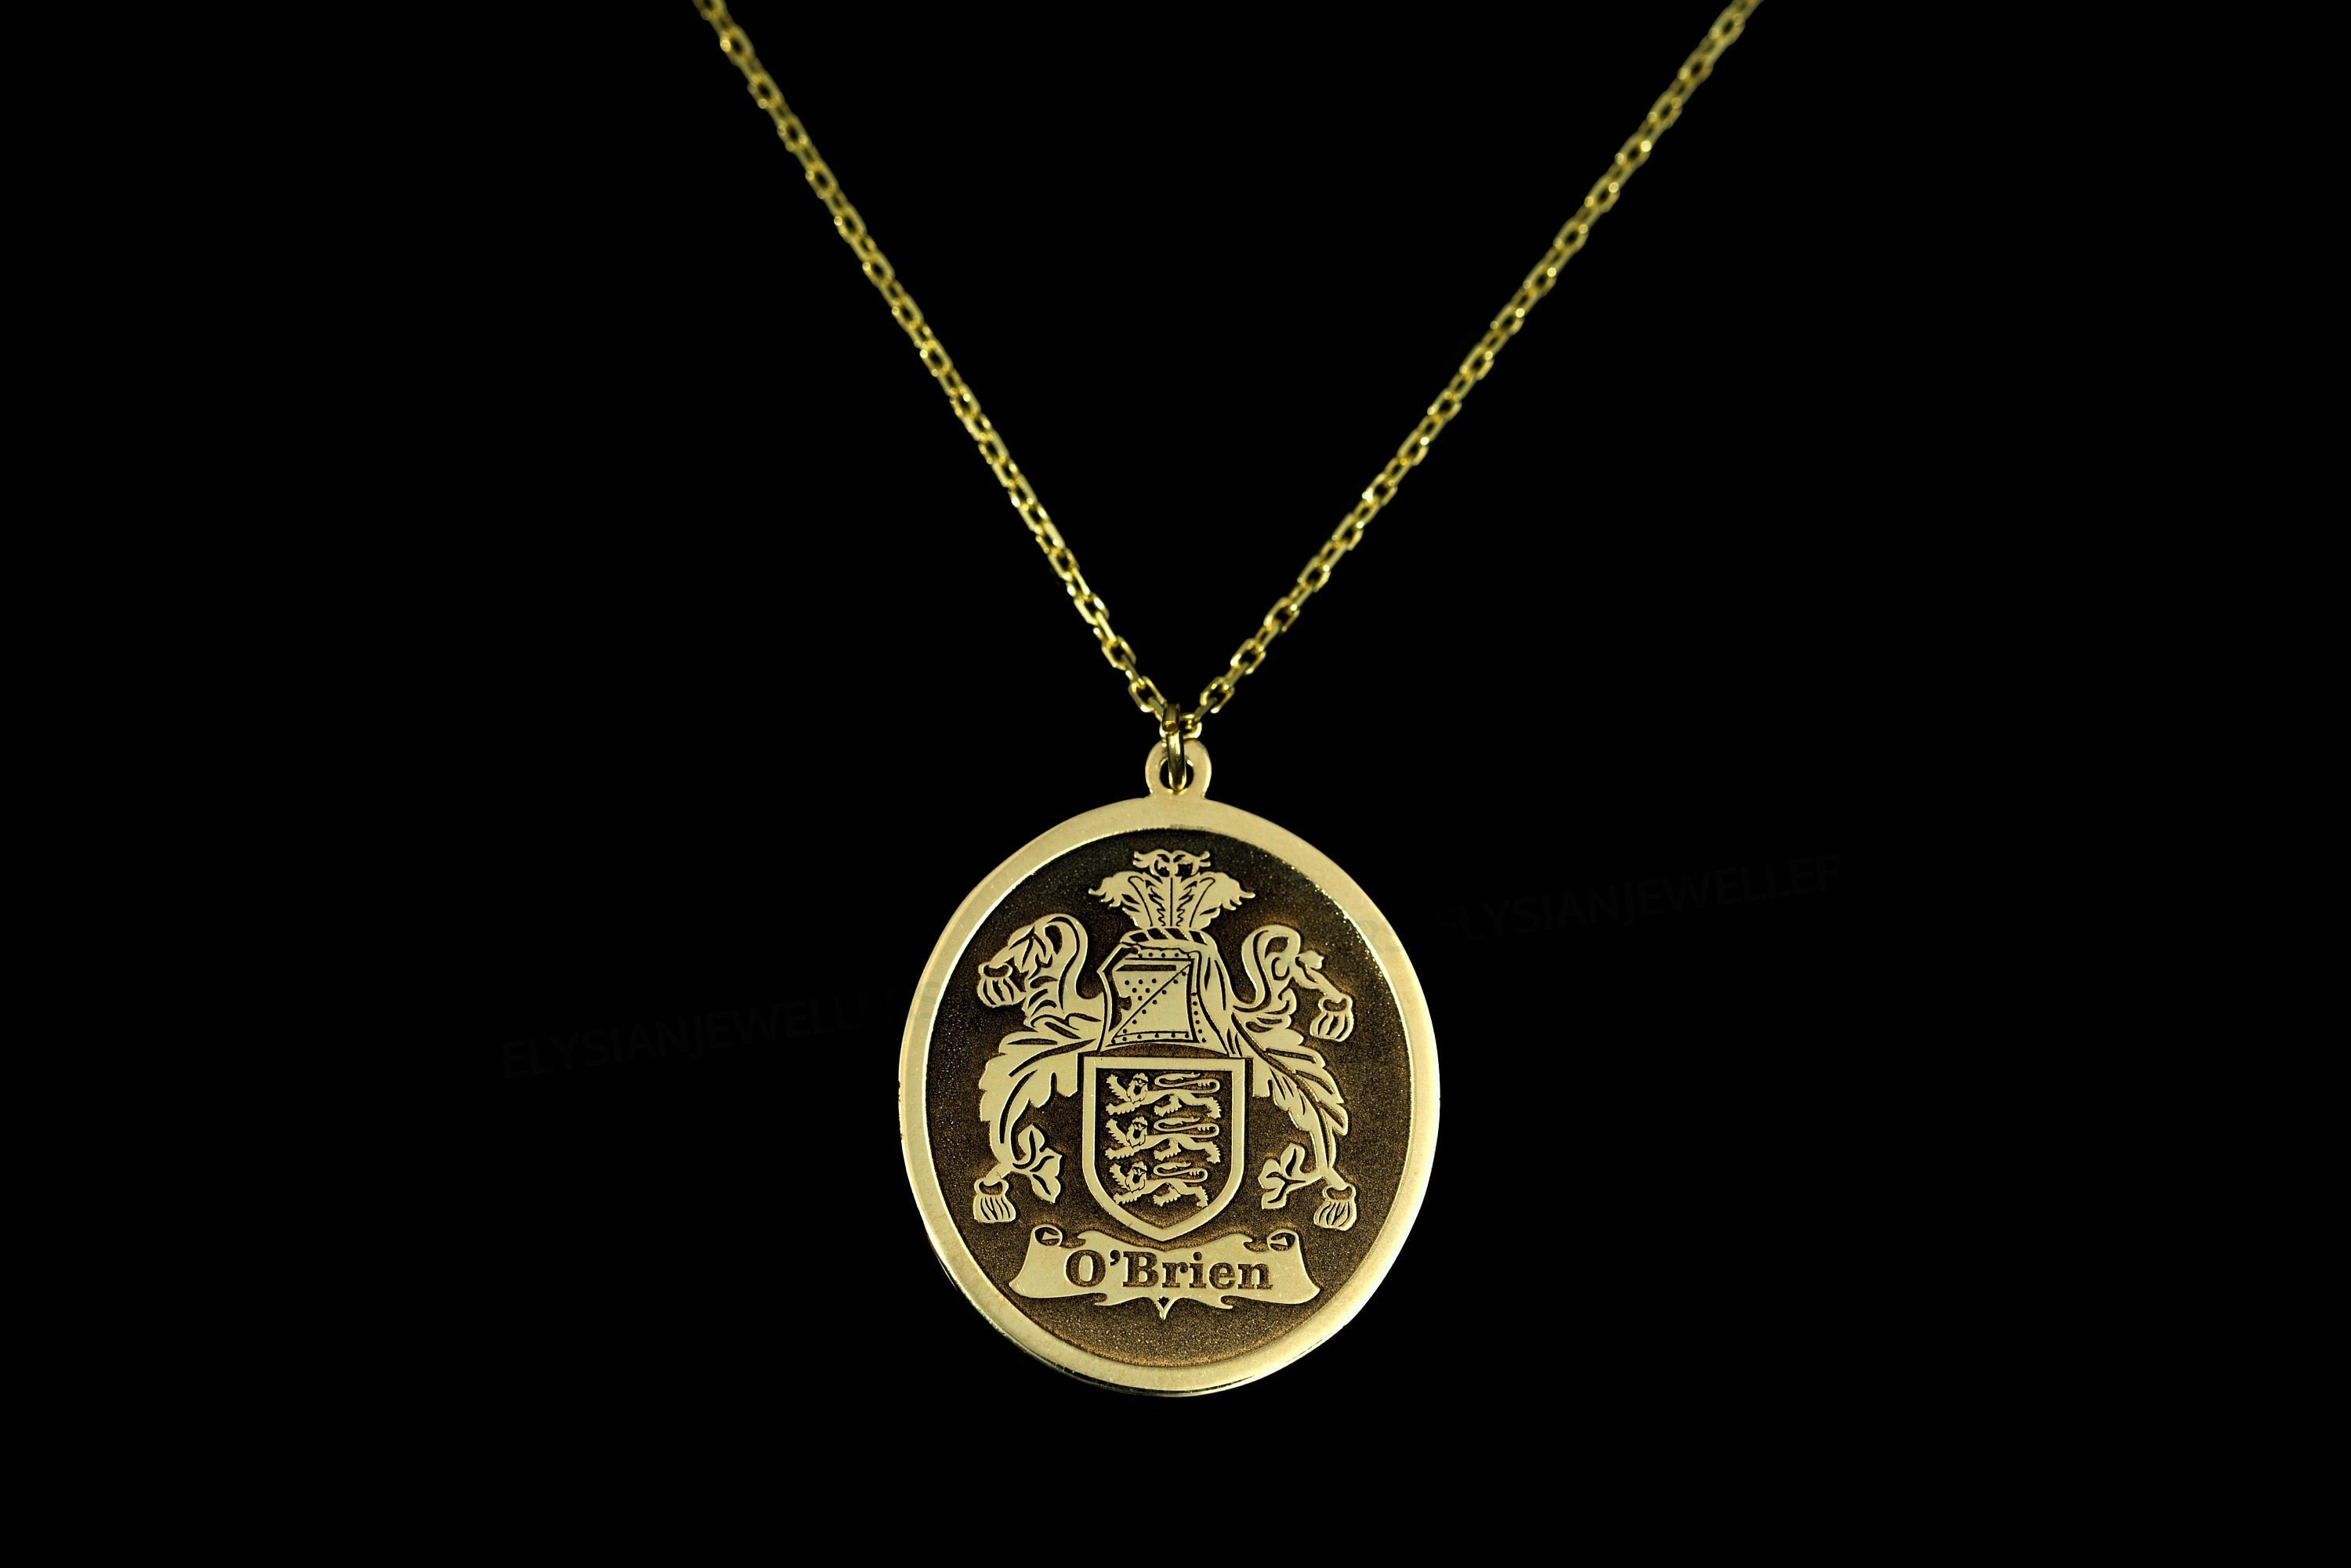 Sterling Silver Dual Family Crest Pendant, Made in…